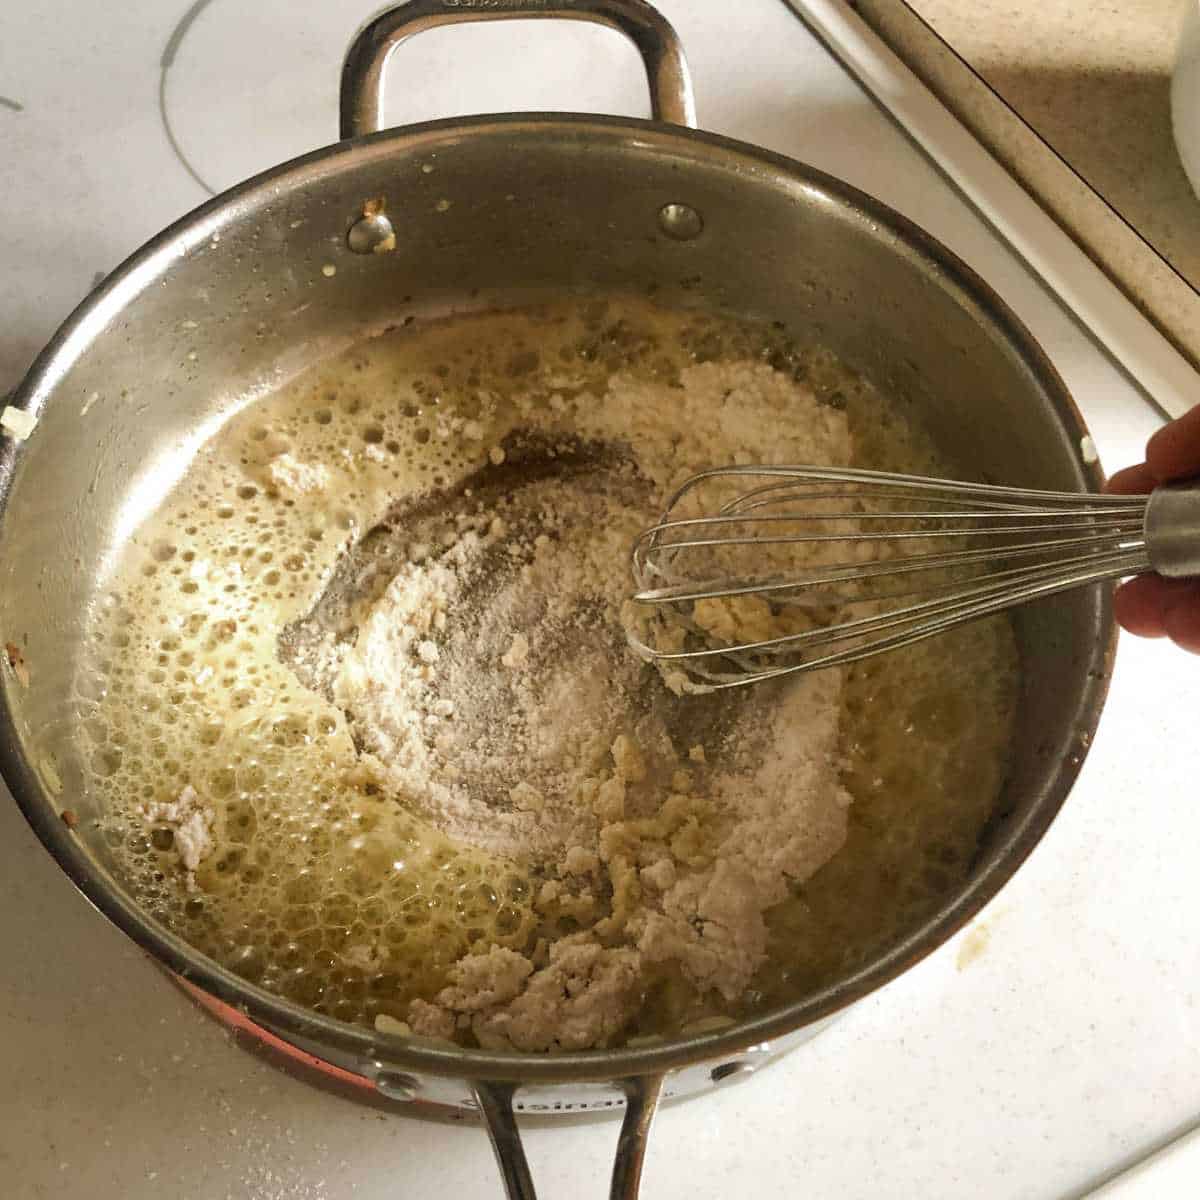 Gluten free flour being whisked into melted dairy free butter in a skillet.